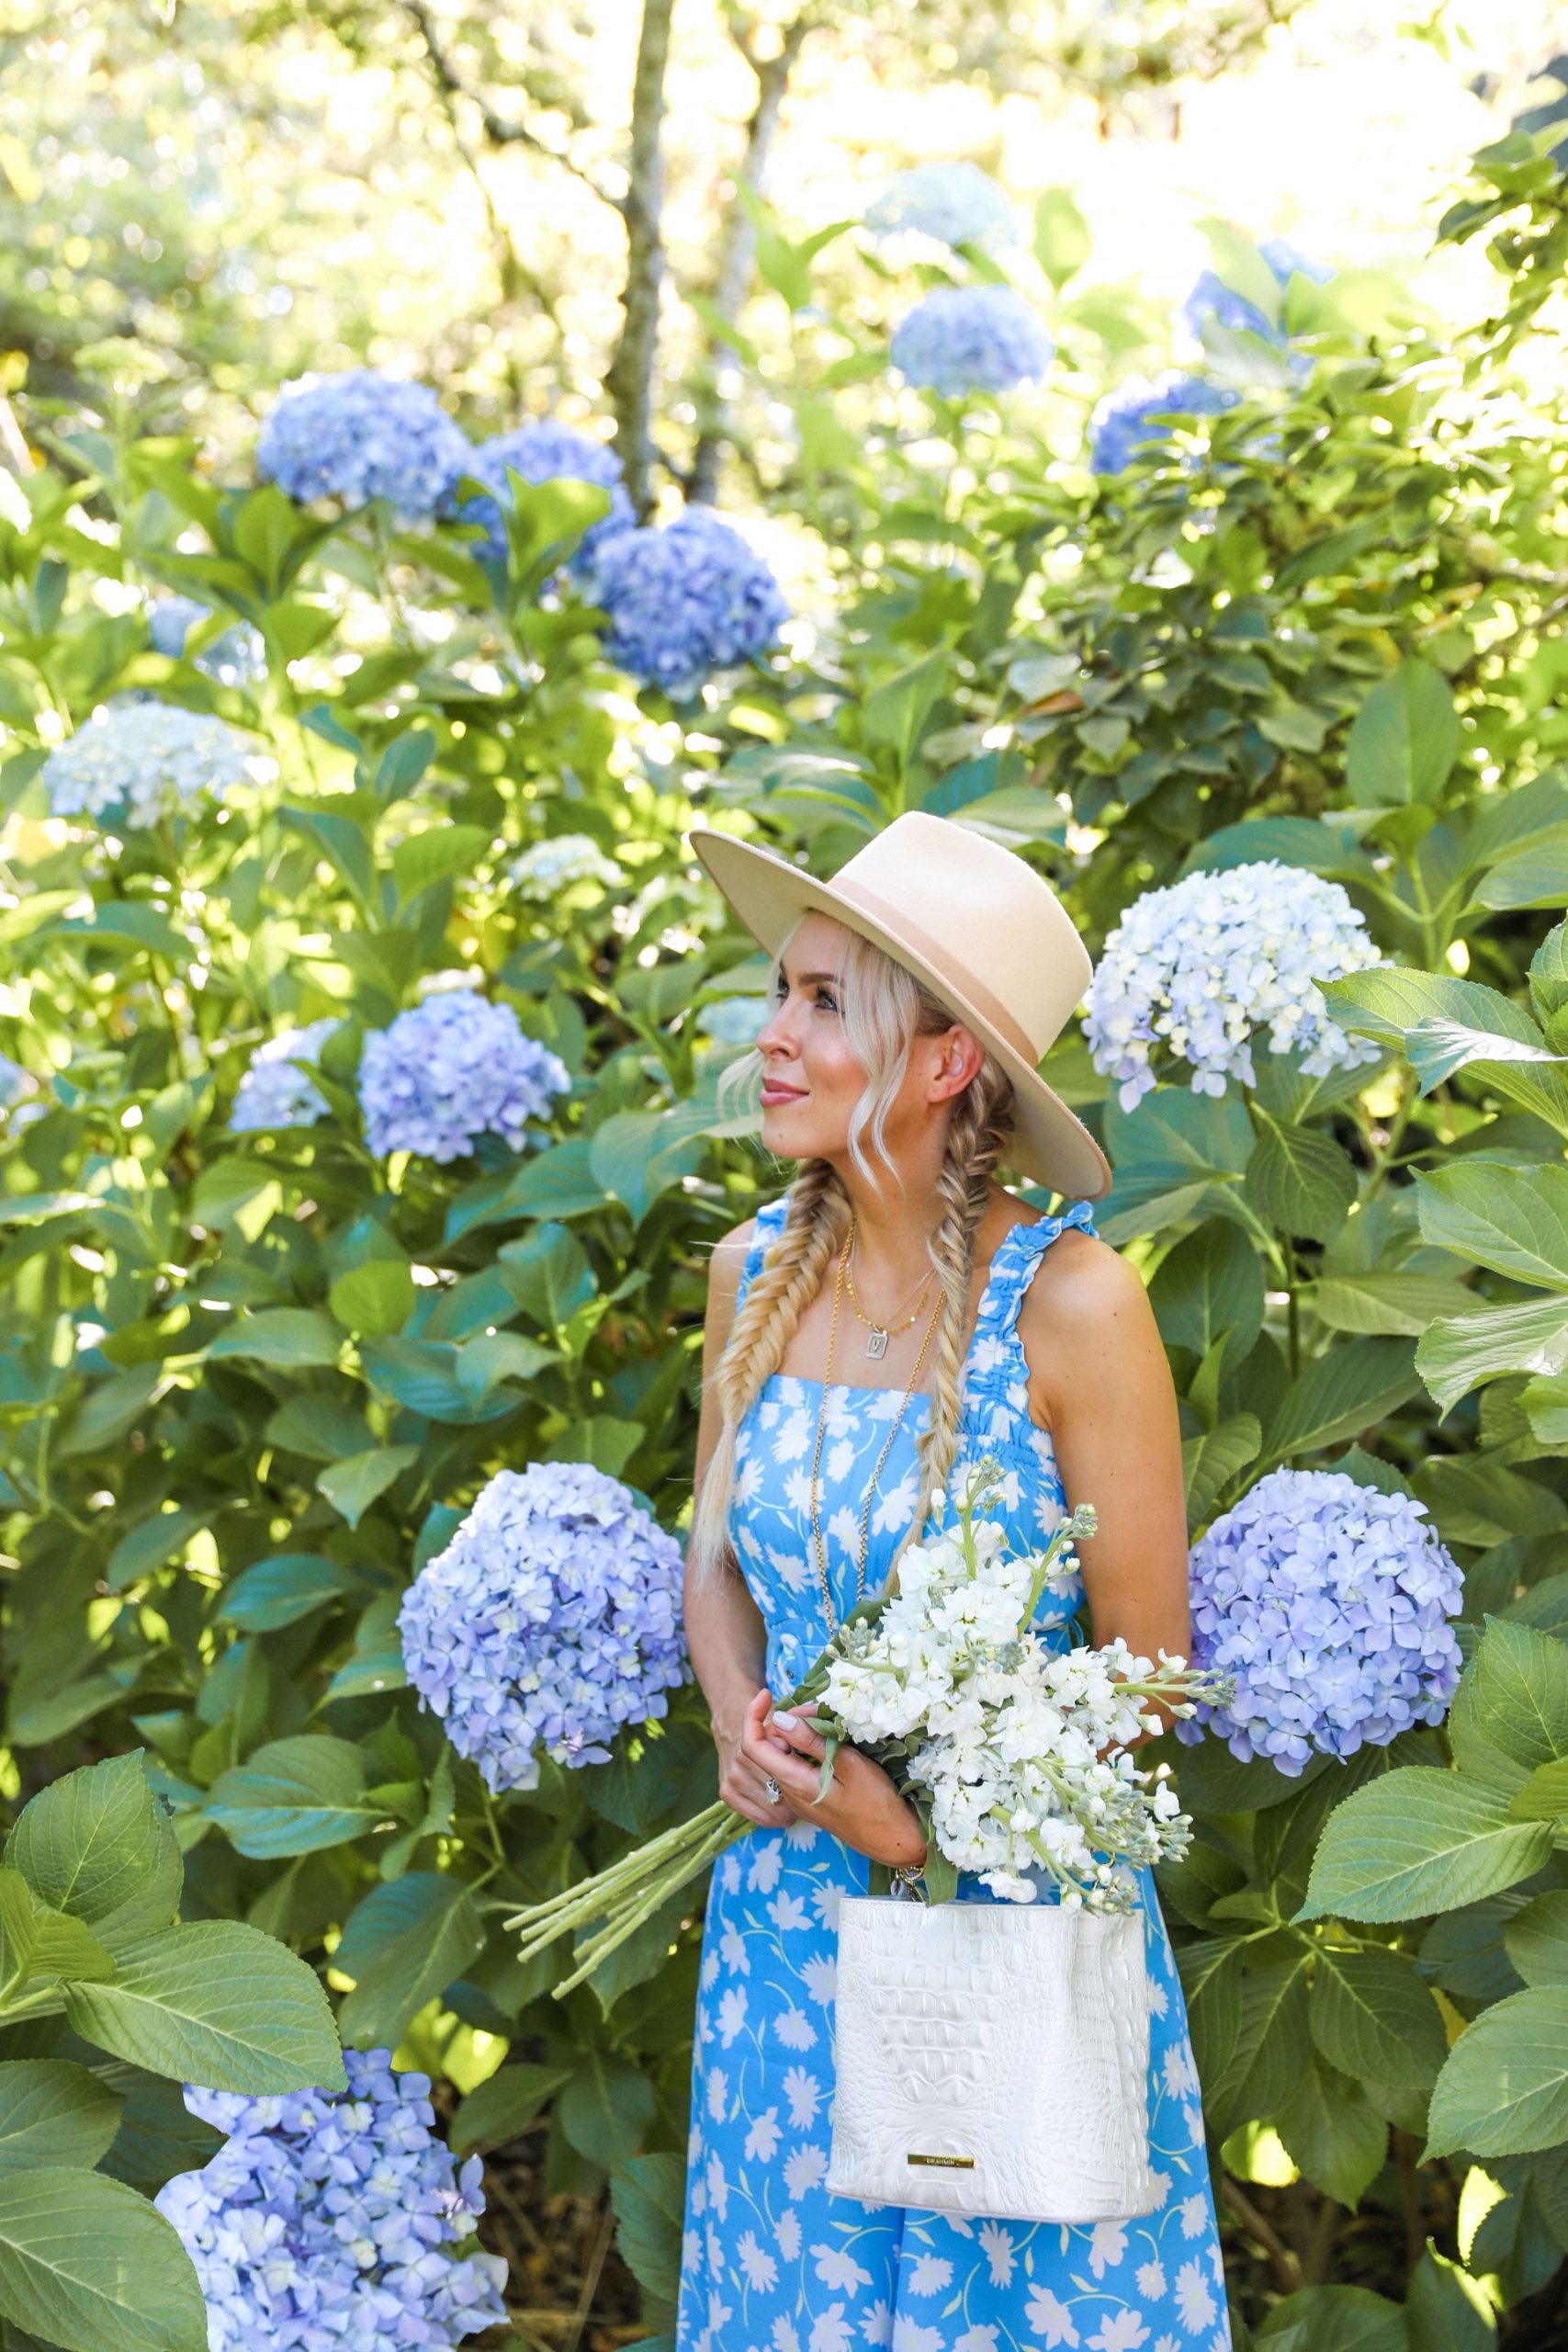 Favorite moments at Filoli Gardens. Faithful the brand jumpsuit shopbop in a hydrangea garden in Filoli, featured by San Francisco style blogger Lombard and Fifth.